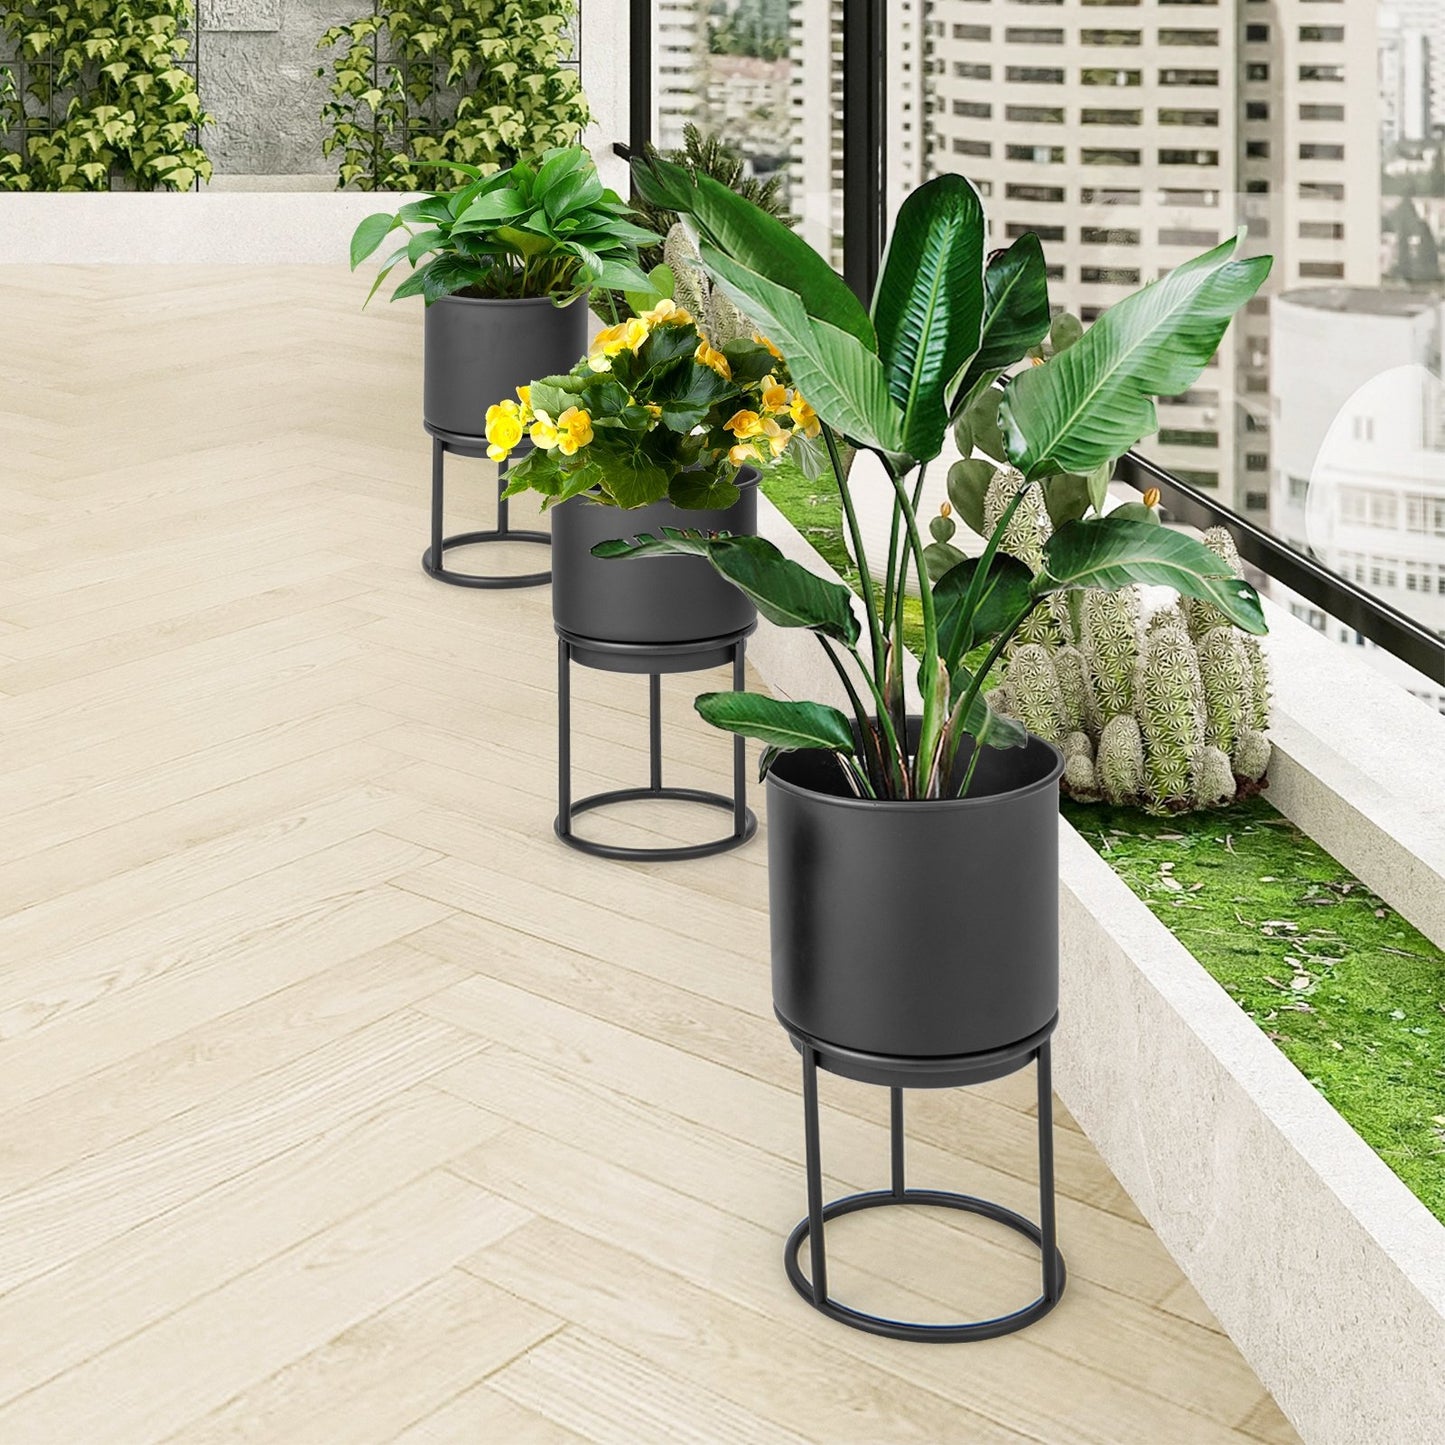 Metal Planter Pot Stand Set of 3 with Pots for Home Balcony Garden, Black